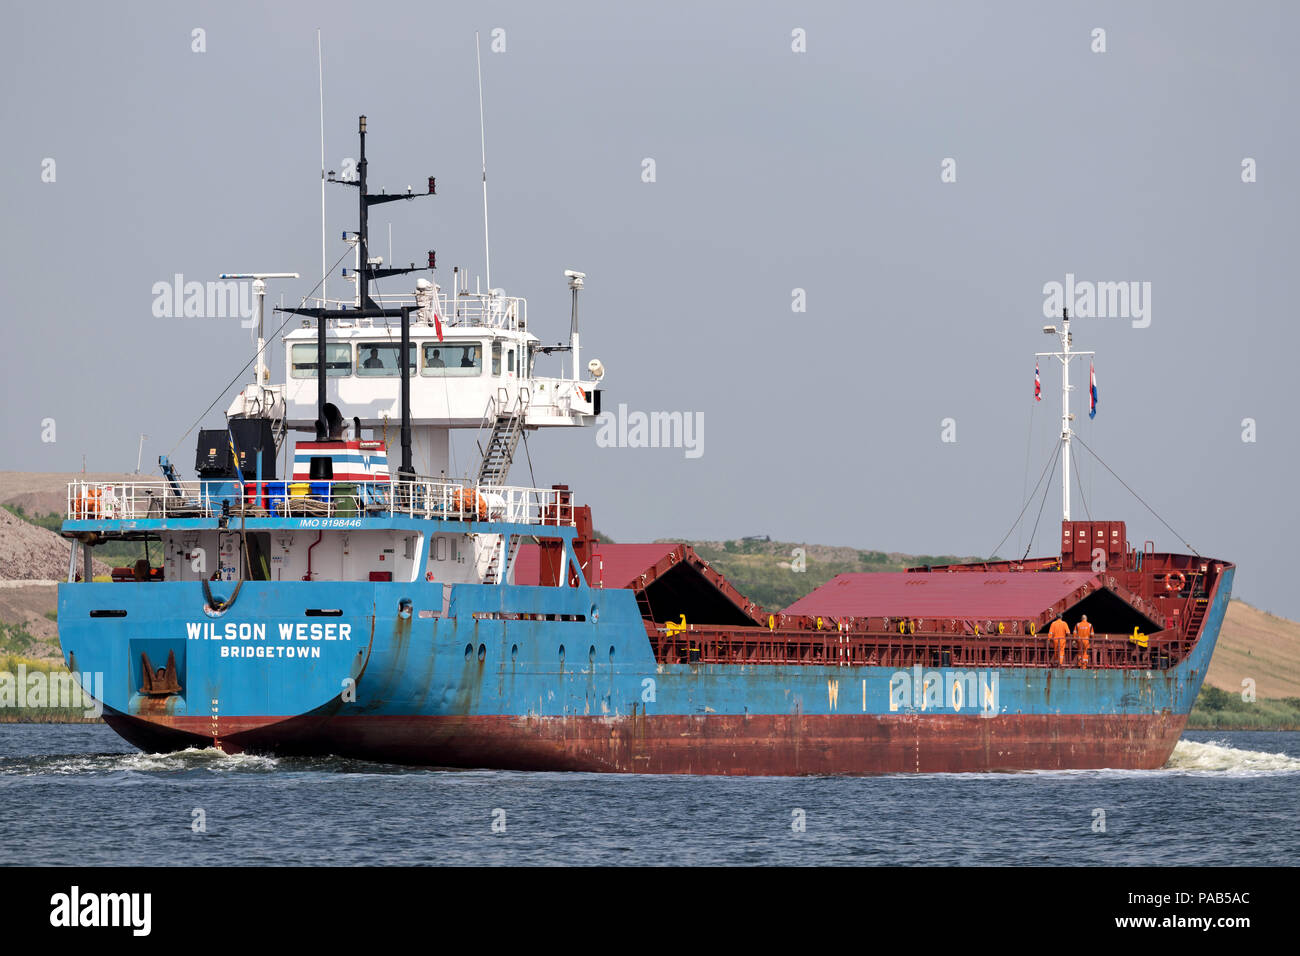 WILSON WESER inbound Amsterdam. Wilson ASA is one of the largest short sea shipping companies in the world that operates about 100 vessels. Stock Photo